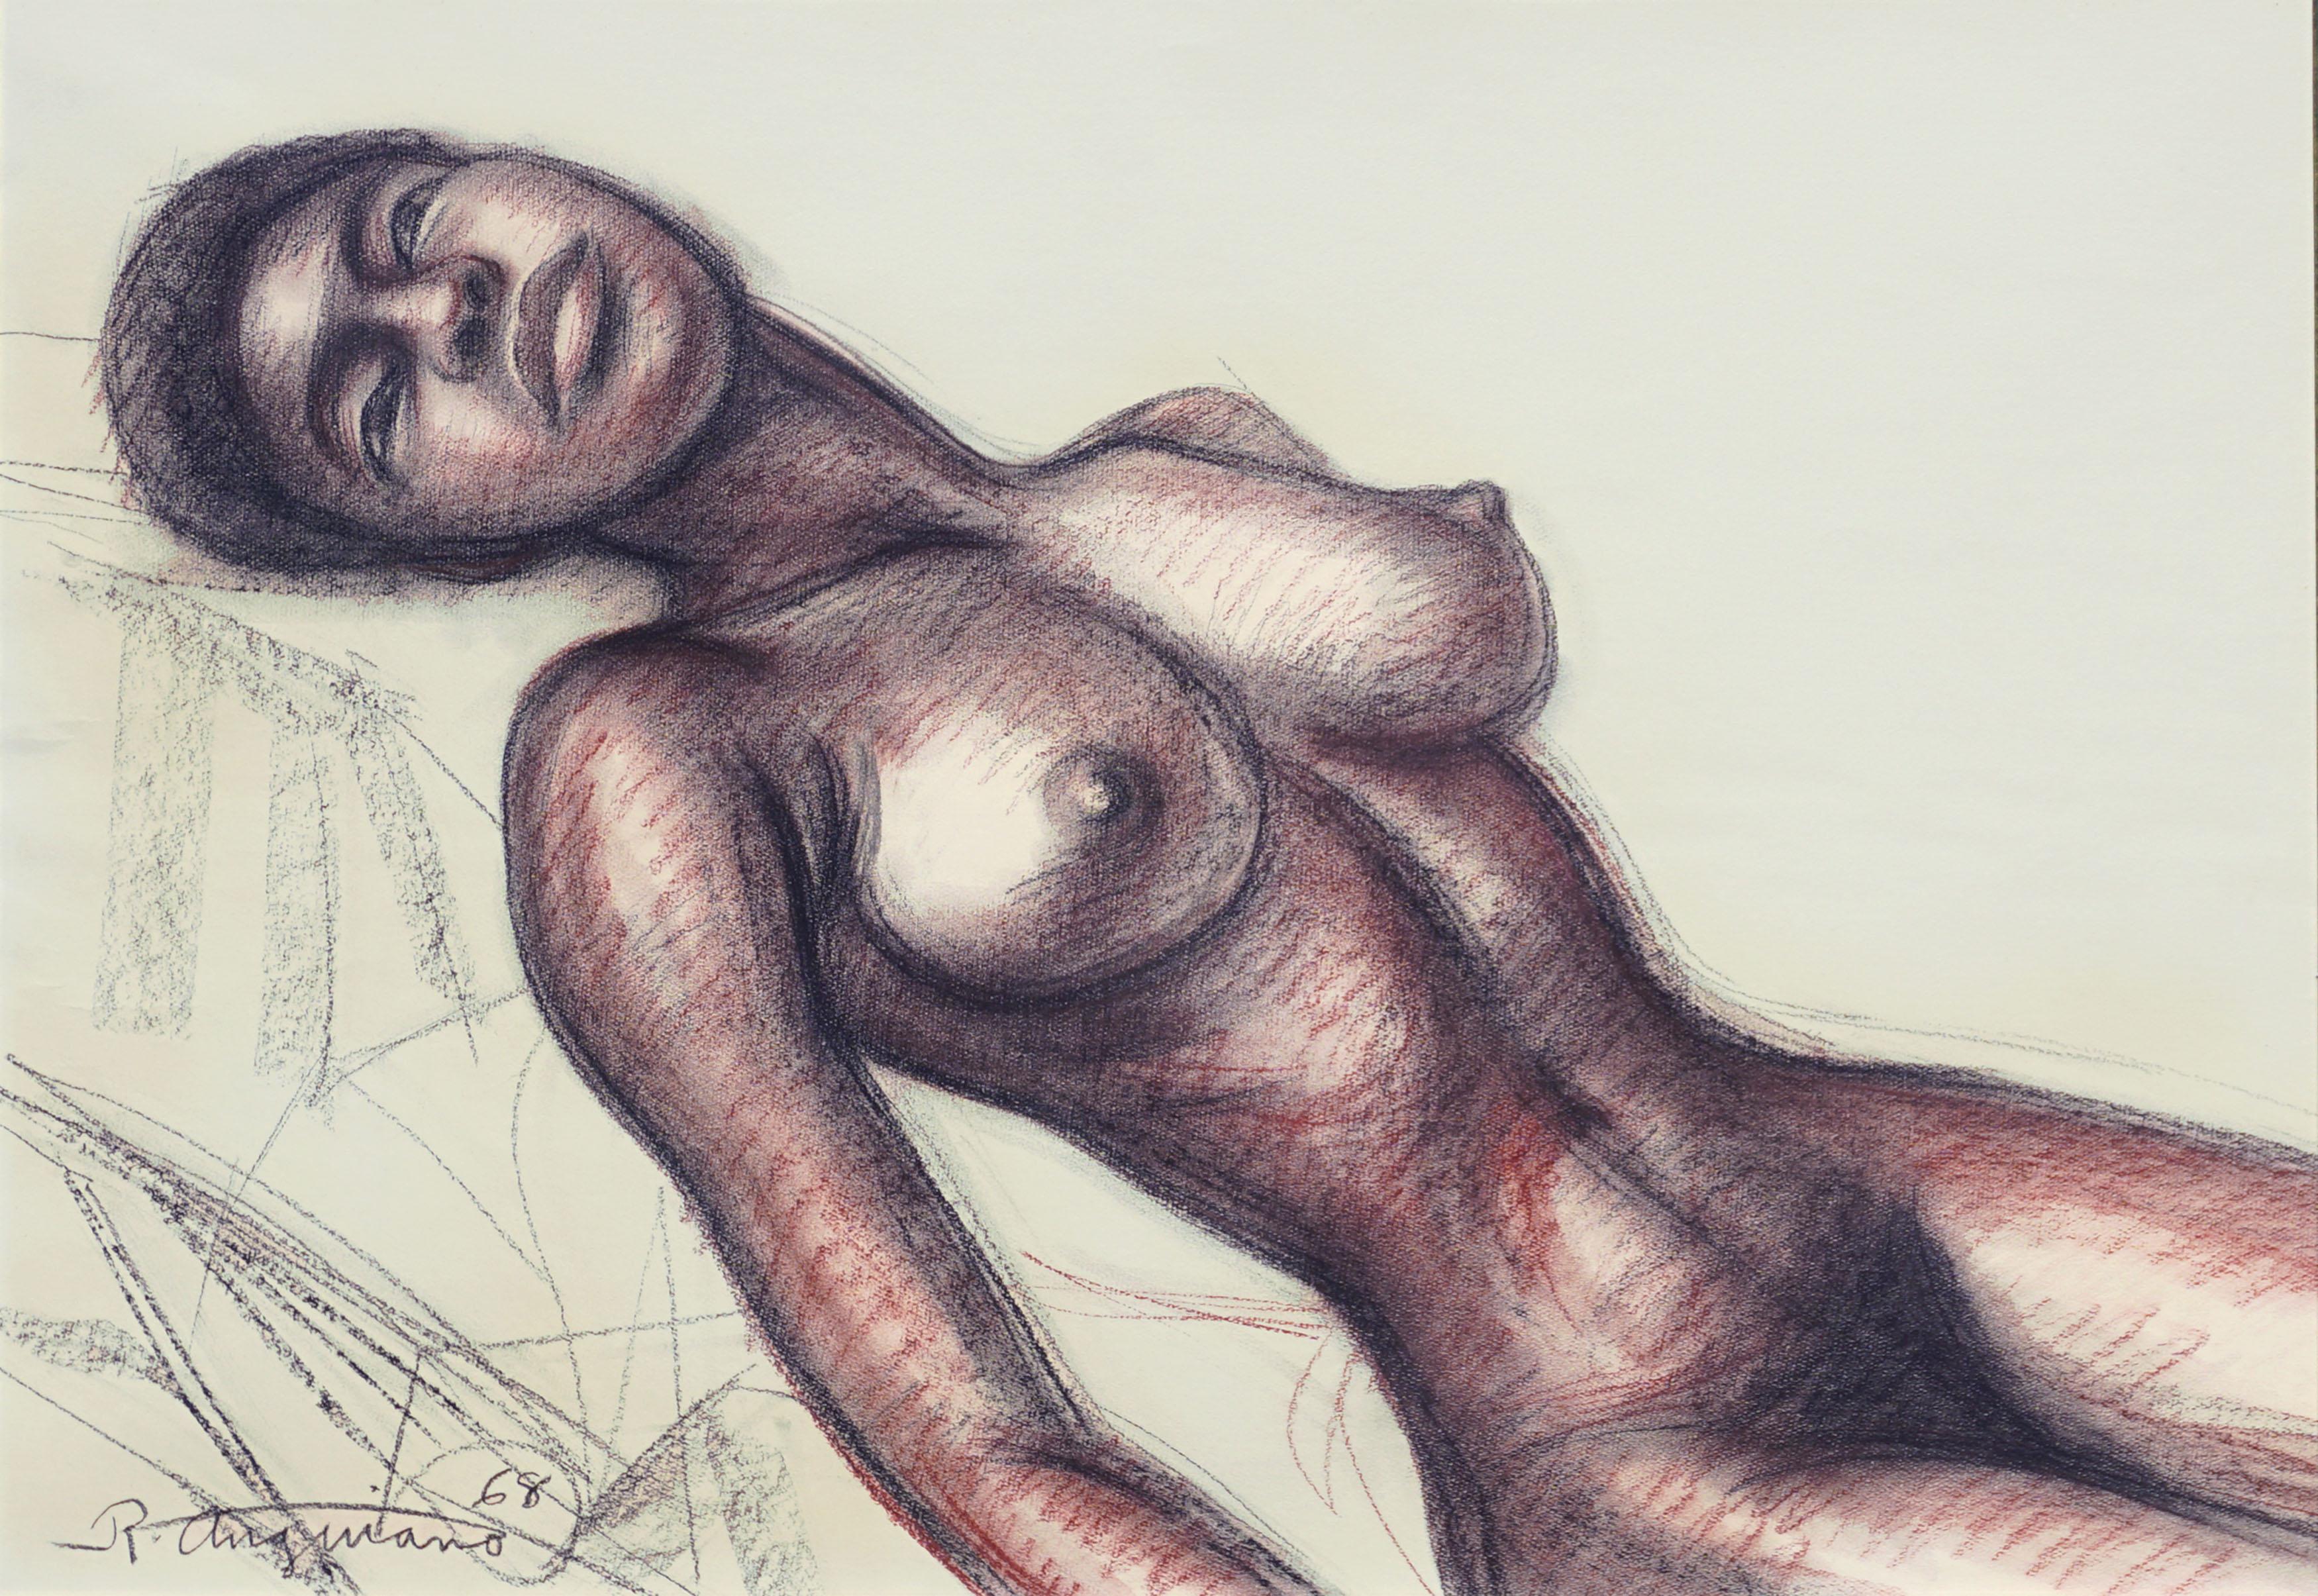 Mid Century Nude Figure Study of a Black Woman - Art by Raul Anguiano